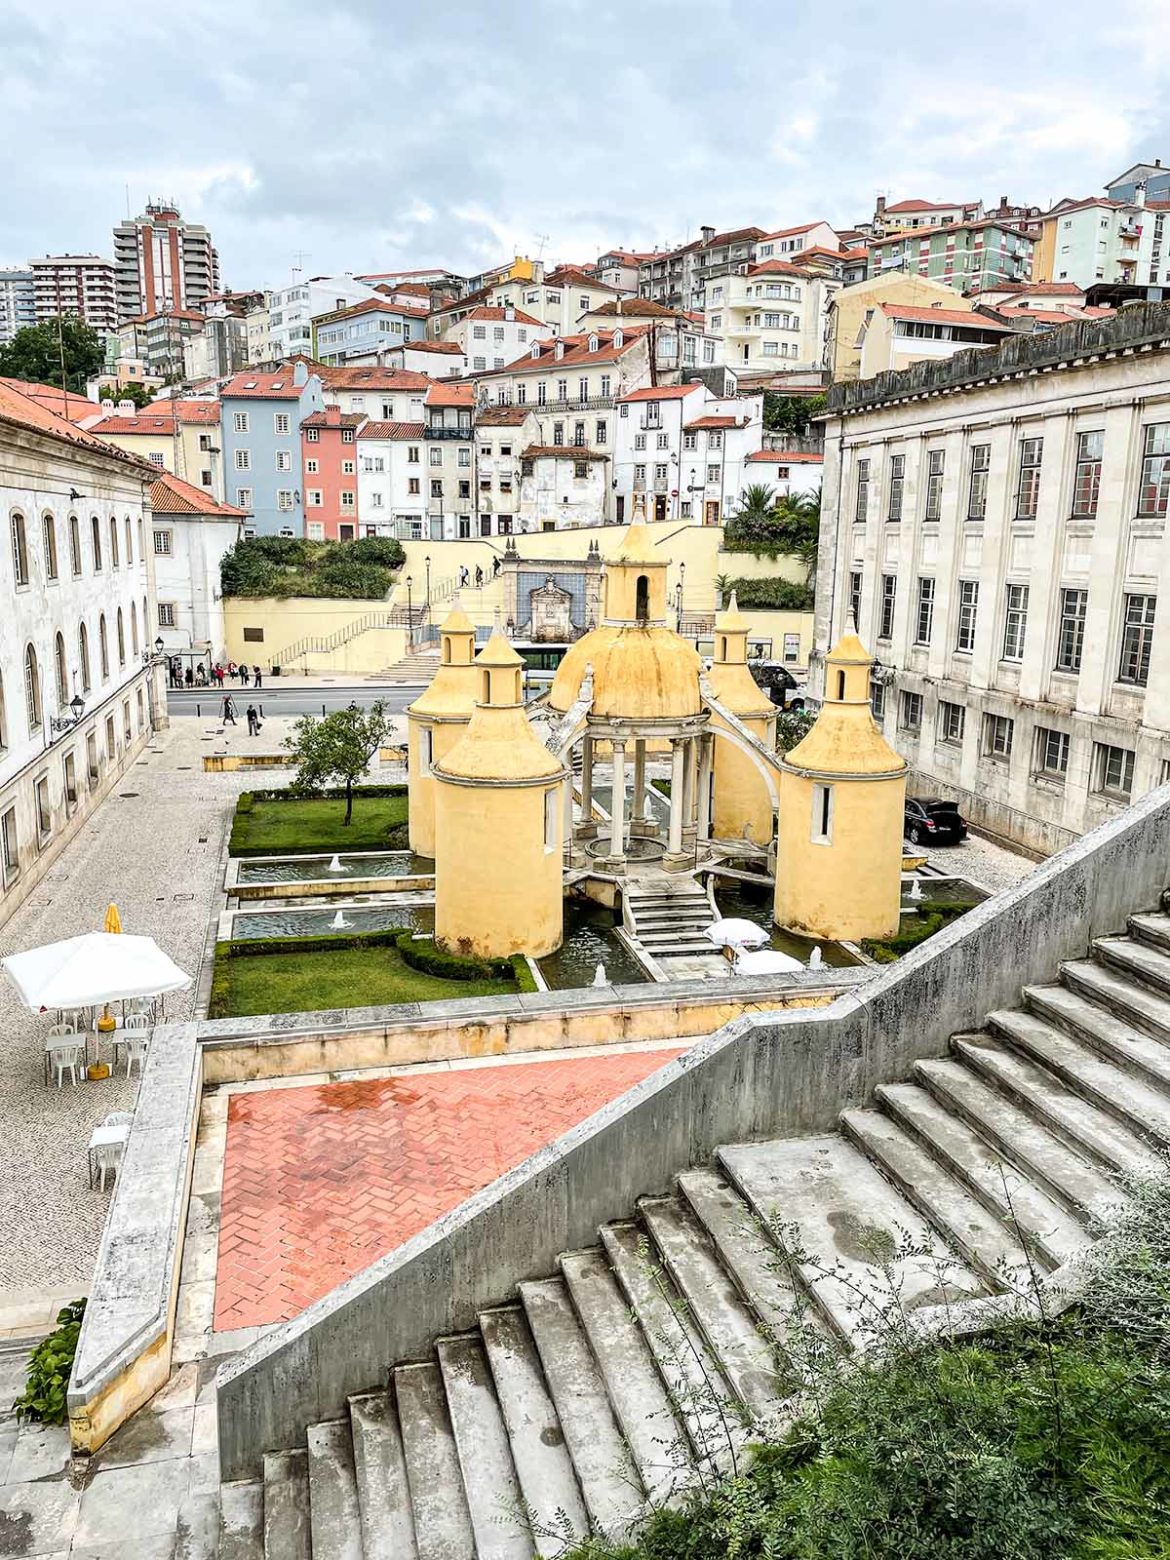 Things to-do in the old university city of Coimbra